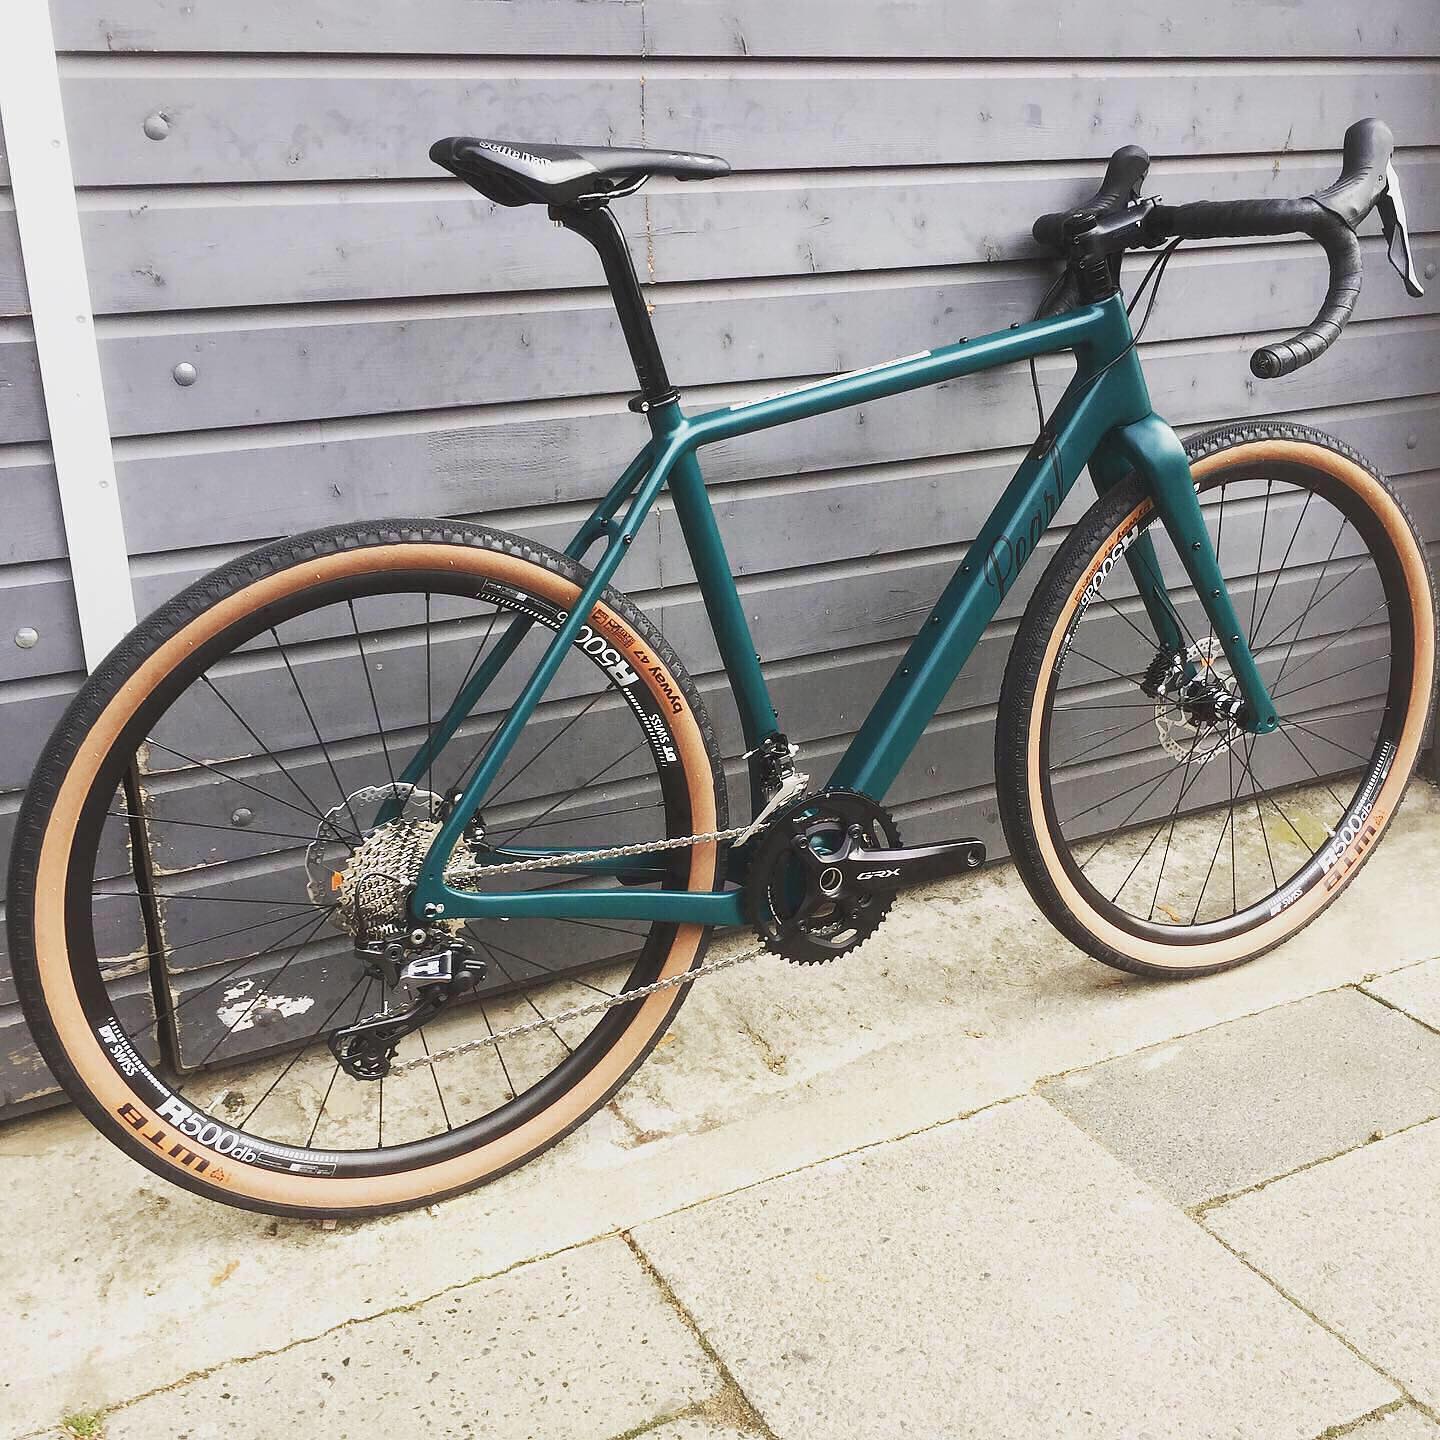 Get your custom Gravelgrinder from Pearl Cycles